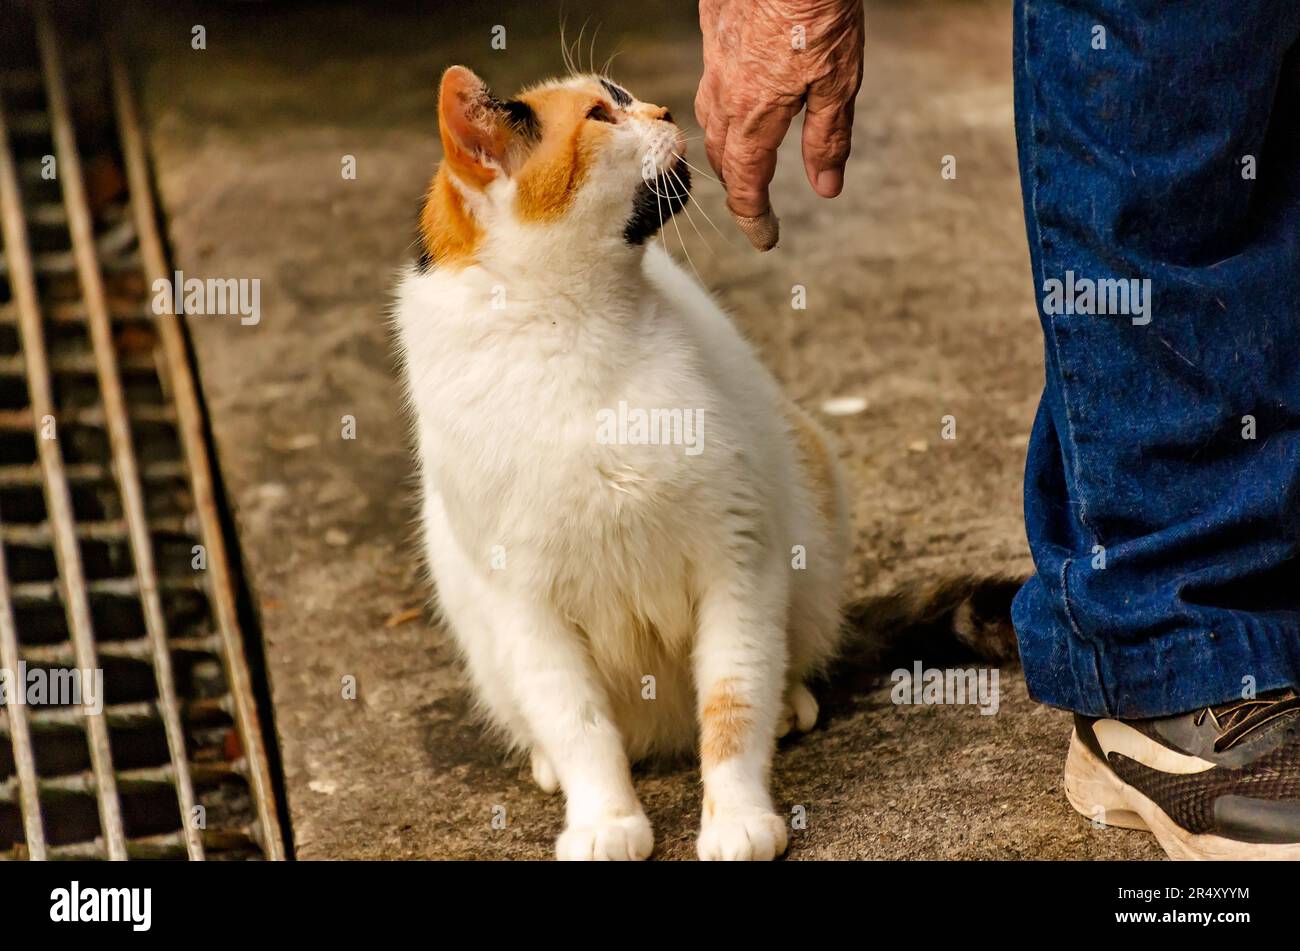 An animal rescue volunteer allows a pregnant feral cat to smell her hand in an effort to gain trust, May 22, 2023, in Coden, Alabama. Stock Photo